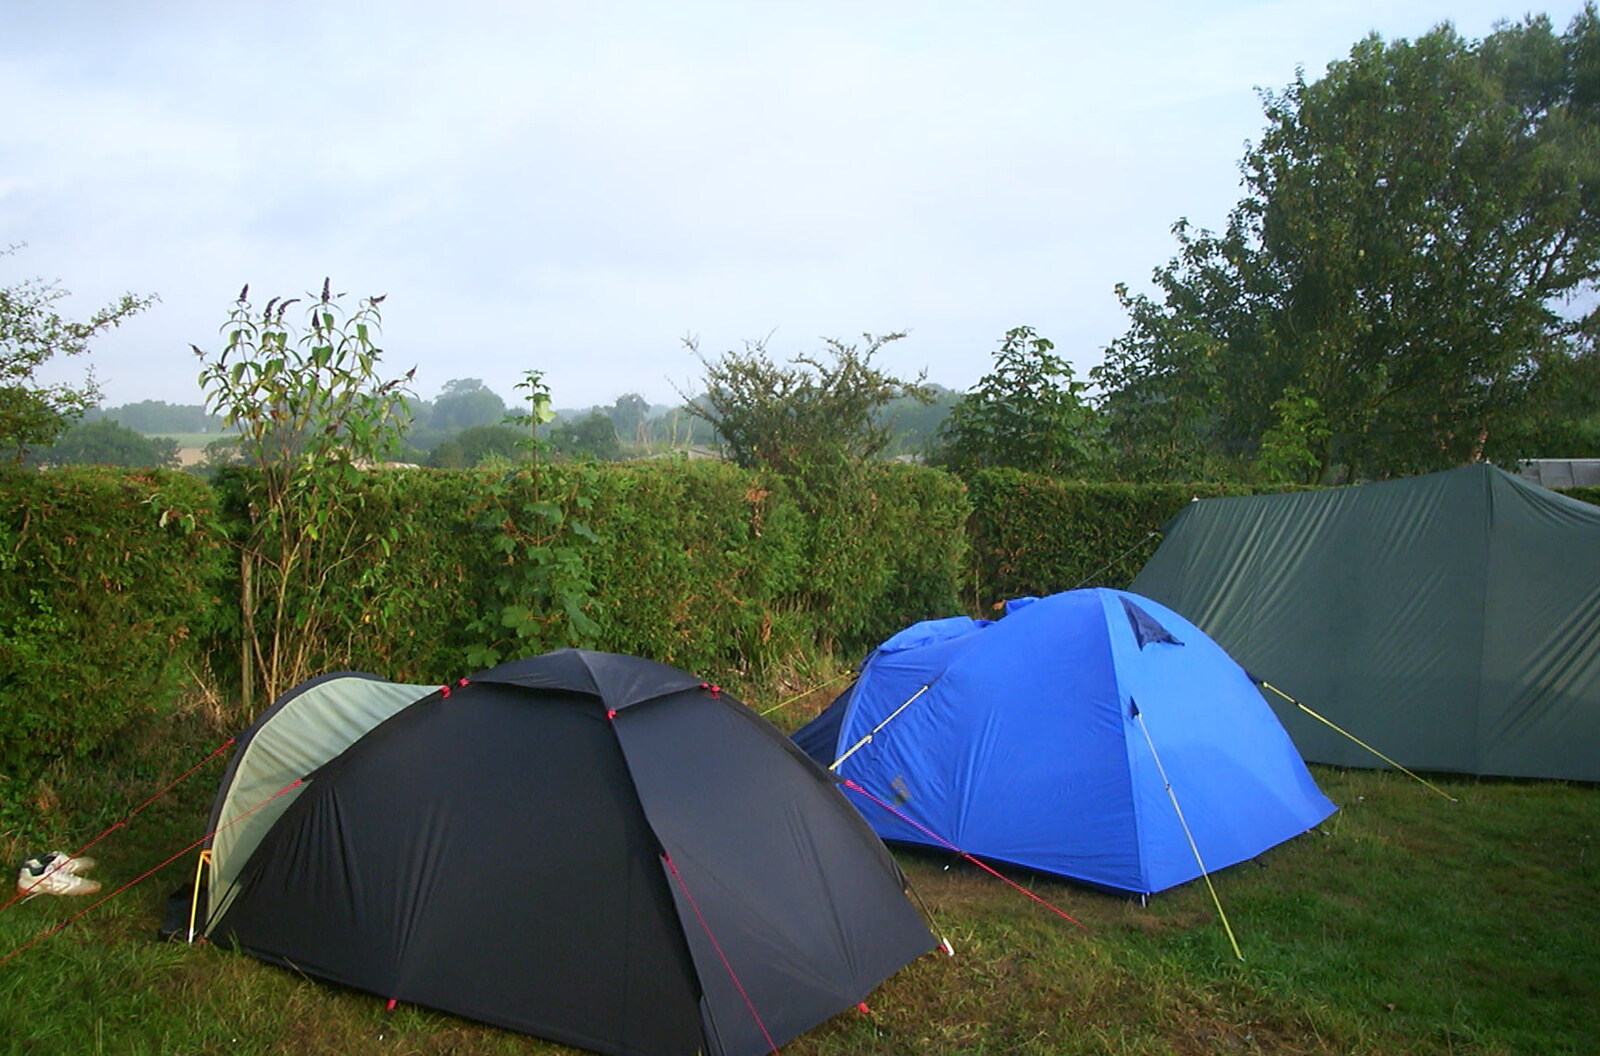 A BSCC Splinter Group Camping Weekend, Theberton, Suffolk - 11th August 2002: Morning tents